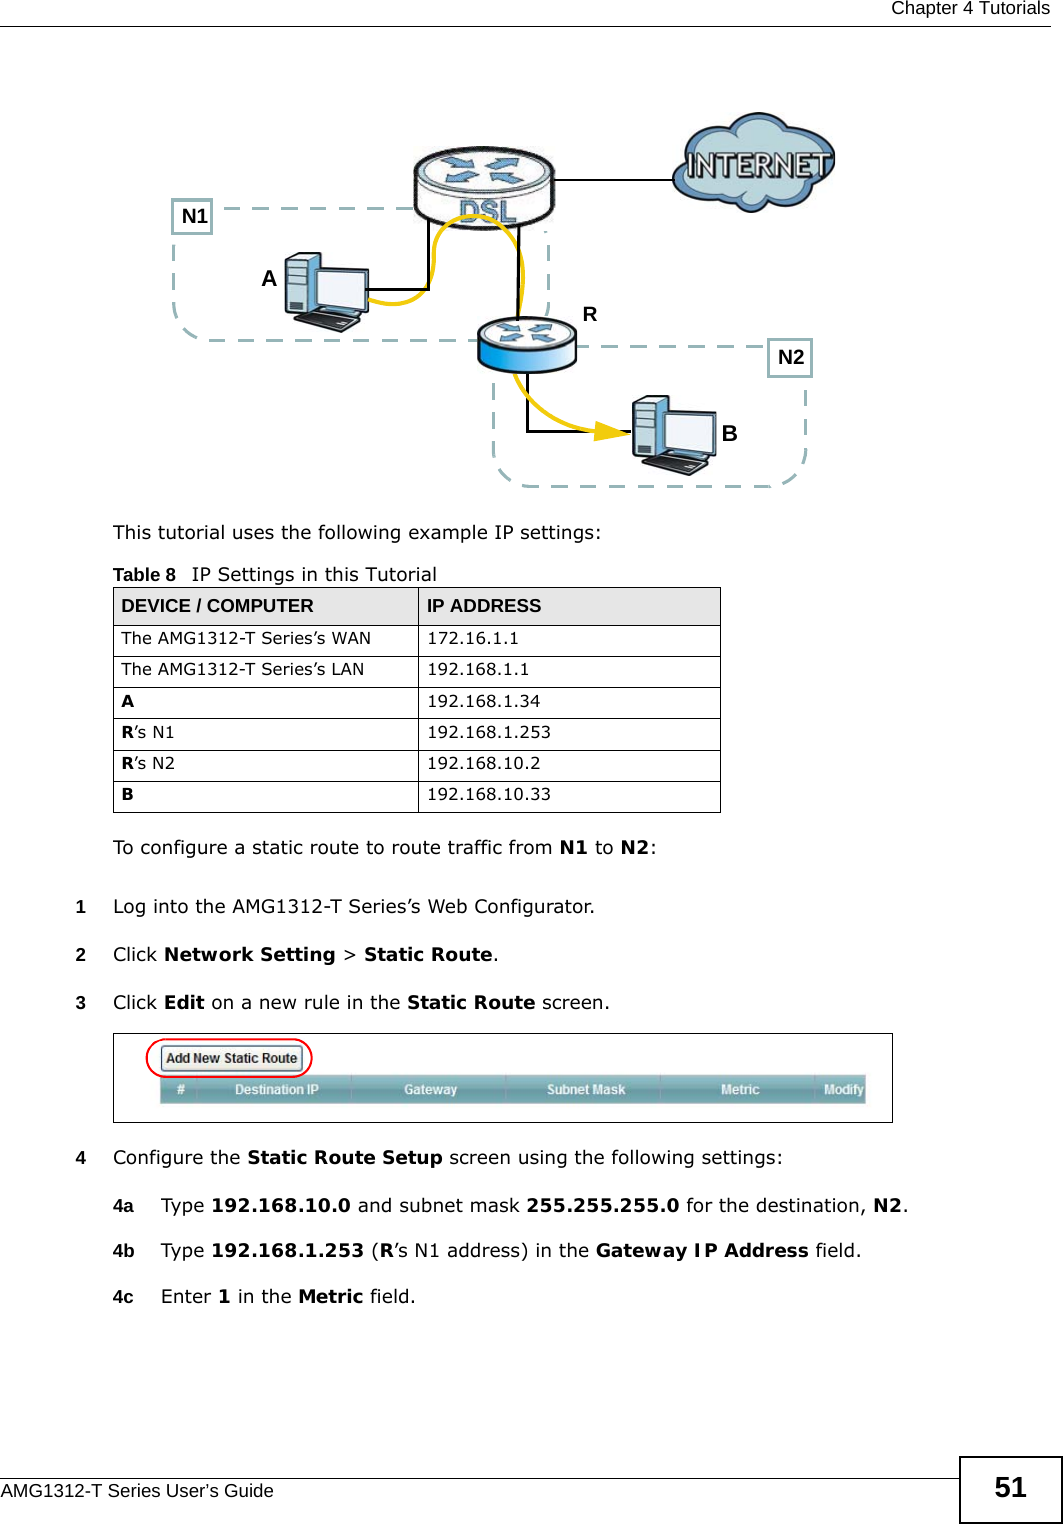  Chapter 4 TutorialsAMG1312-T Series User’s Guide 51This tutorial uses the following example IP settings:To configure a static route to route traffic from N1 to N2:1Log into the AMG1312-T Series’s Web Configurator.2Click Network Setting &gt; Static Route.3Click Edit on a new rule in the Static Route screen.4Configure the Static Route Setup screen using the following settings:4a Type 192.168.10.0 and subnet mask 255.255.255.0 for the destination, N2.4b Type 192.168.1.253 (R’s N1 address) in the Gateway IP Address field.4c Enter 1 in the Metric field.Table 8   IP Settings in this TutorialDEVICE / COMPUTER IP ADDRESSThe AMG1312-T Series’s WAN 172.16.1.1The AMG1312-T Series’s LAN 192.168.1.1A192.168.1.34R’s N1  192.168.1.253R’s N2  192.168.10.2B192.168.10.33N2BN1AR